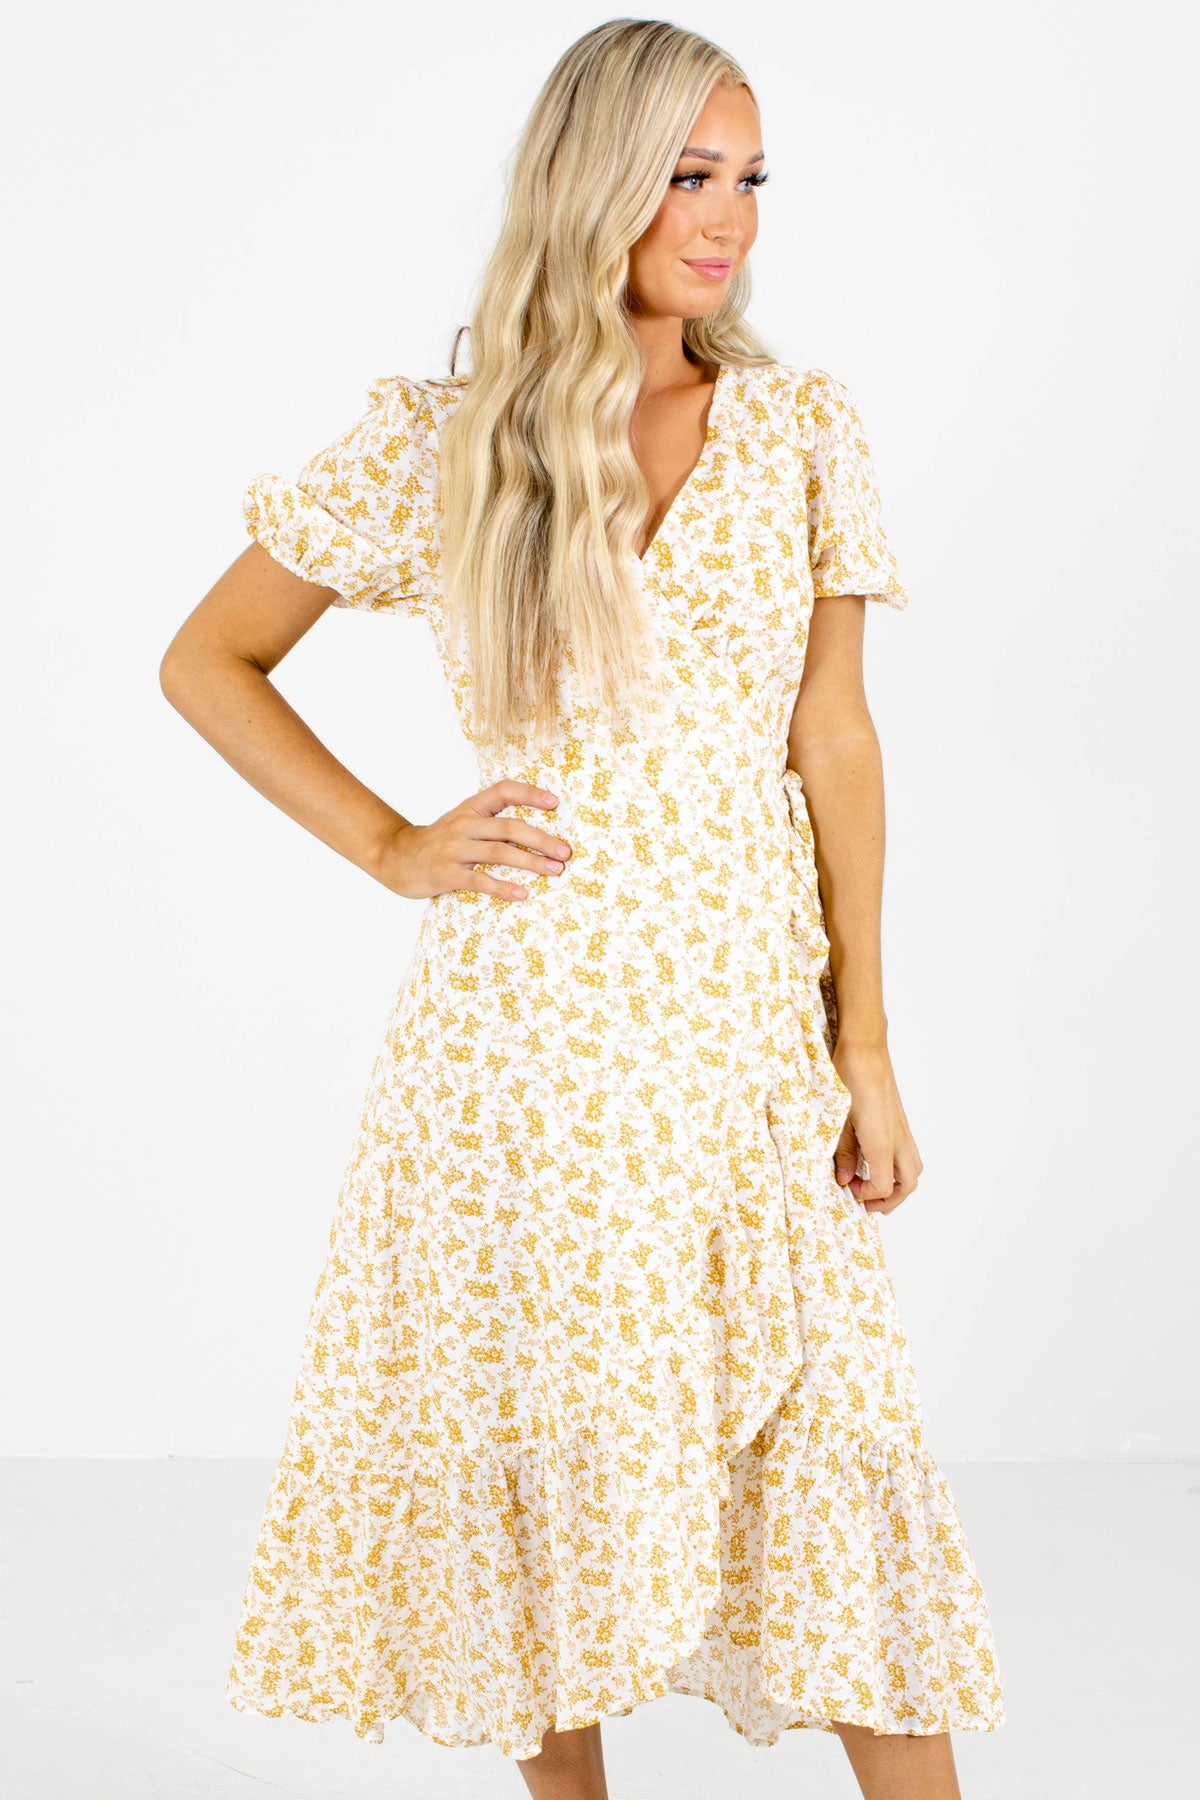 White and Yellow Floral Patterned Boutique Midi Dresses for Women